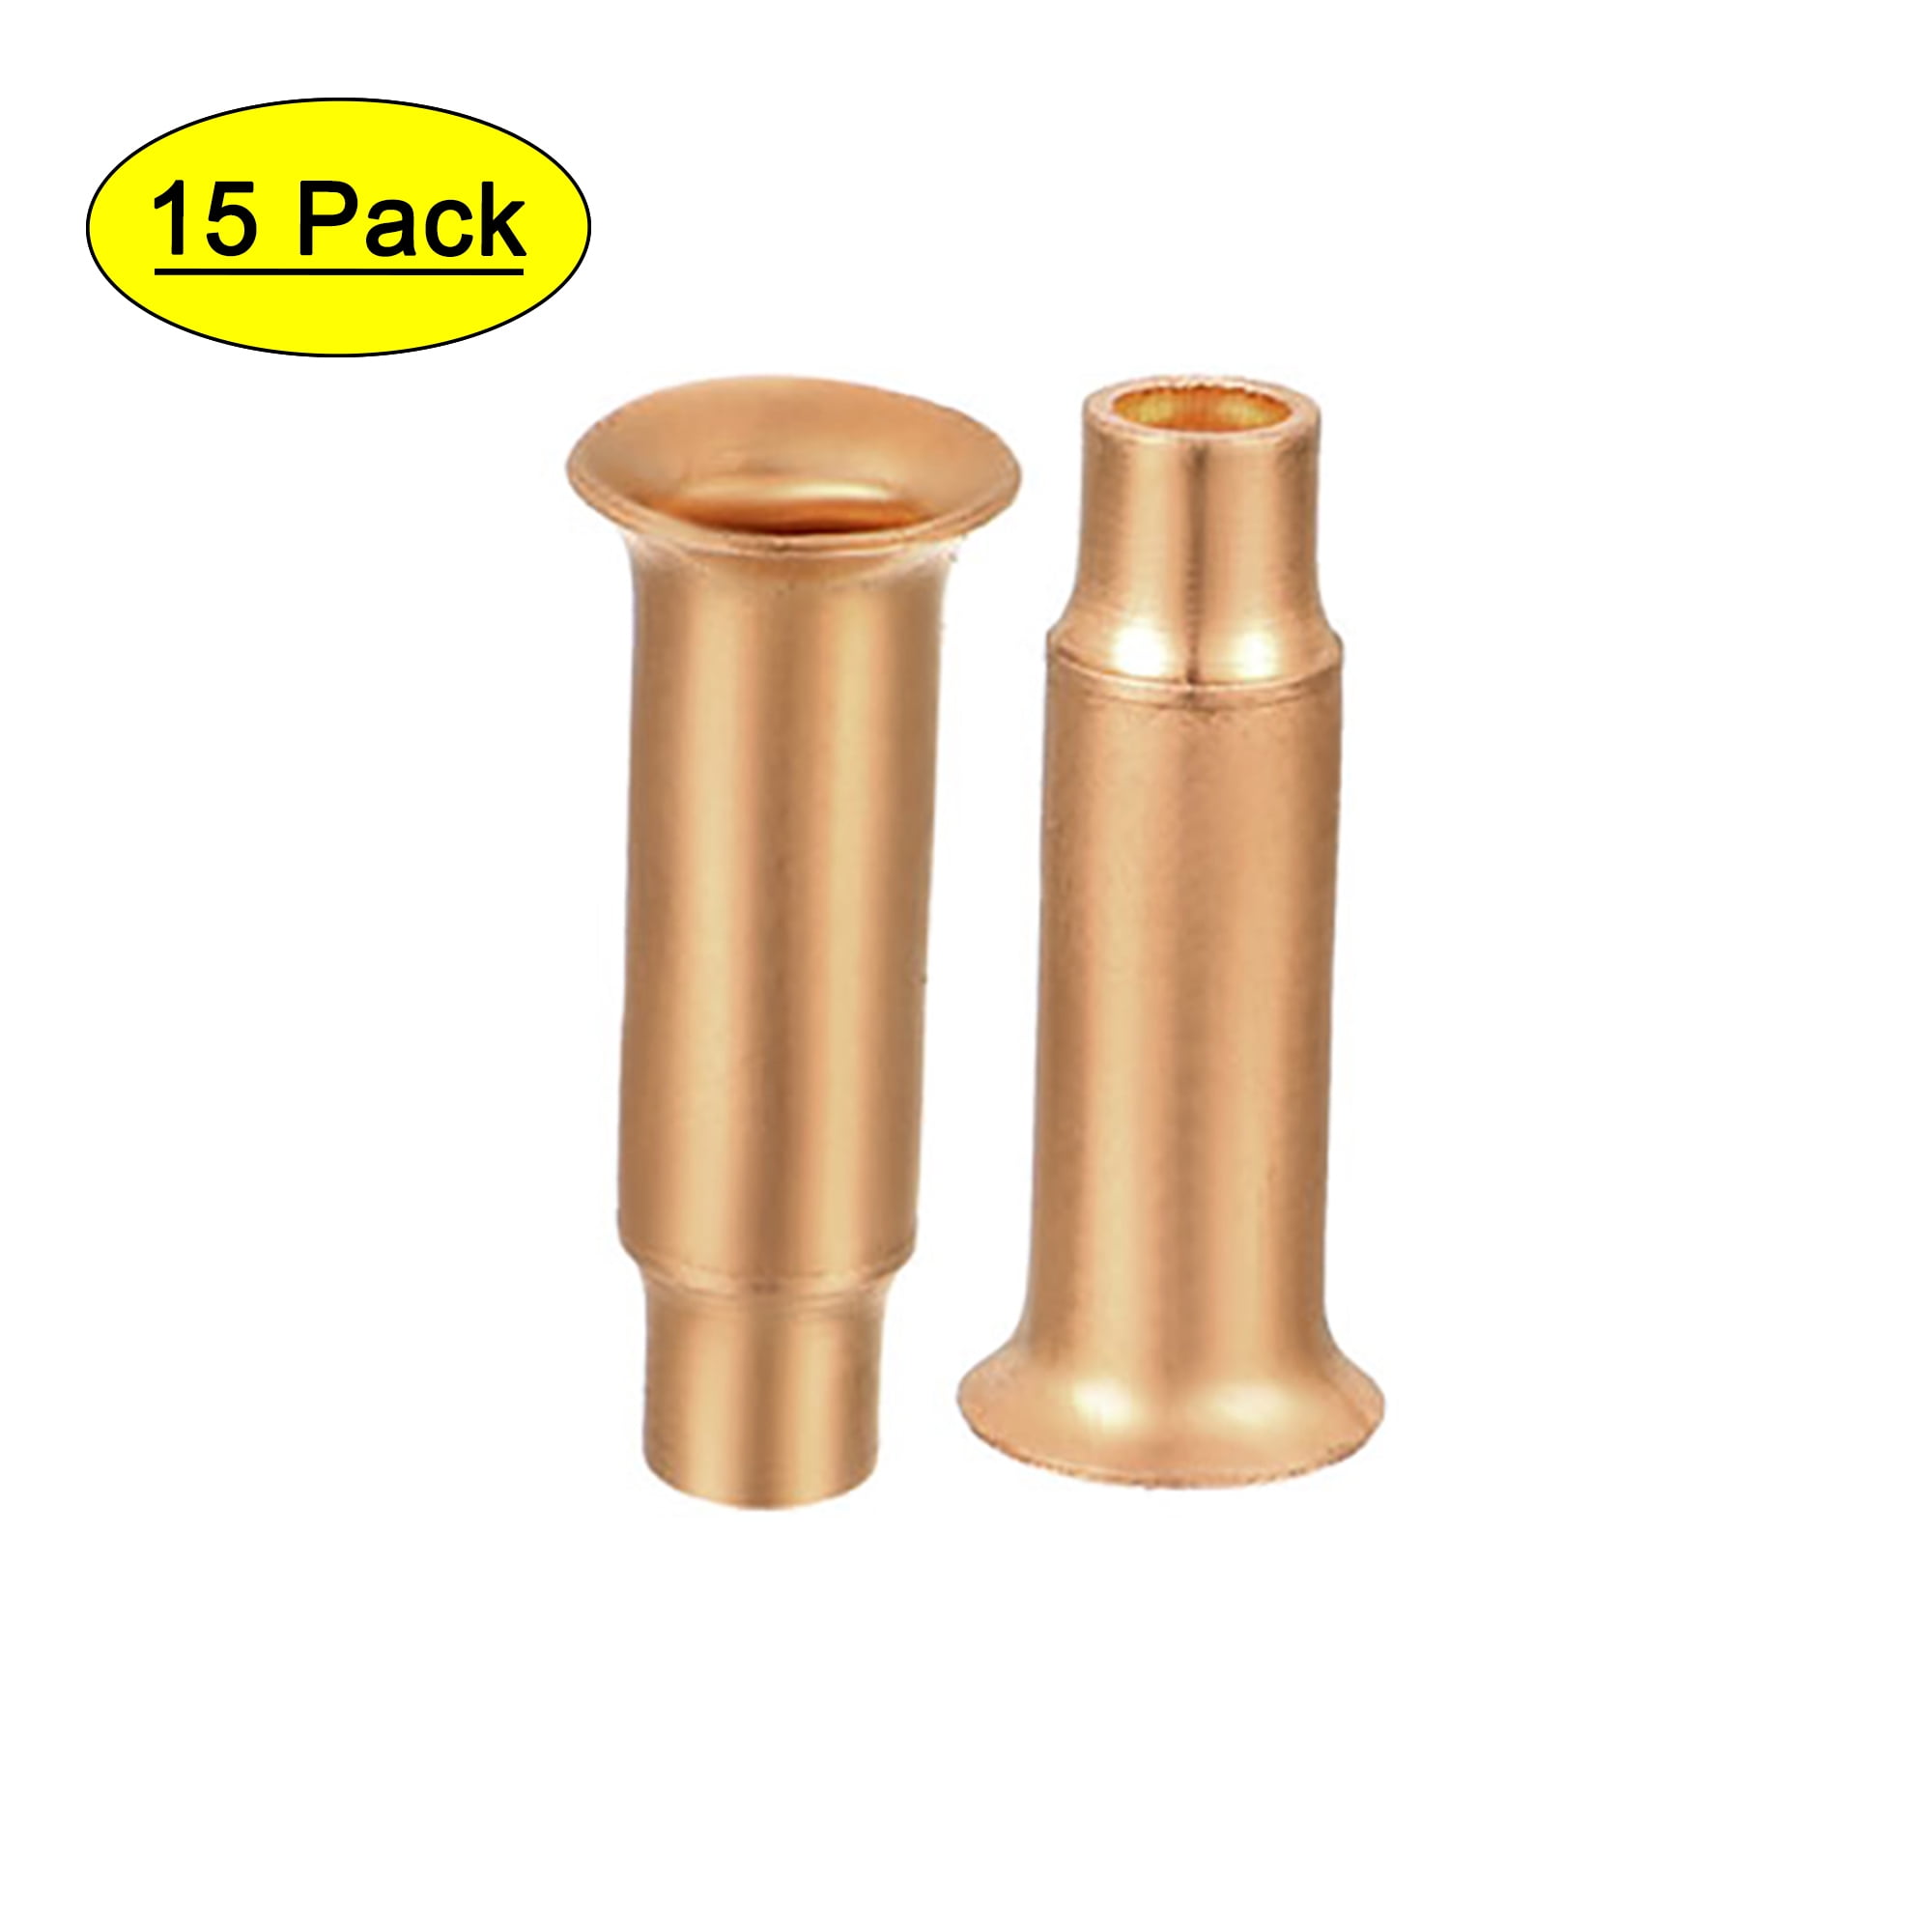 Unique Bargains Tube Flare Fitting 15pcs Copper Tube Refrigeration Tubing  5.2mm OD 3.2mm ID 